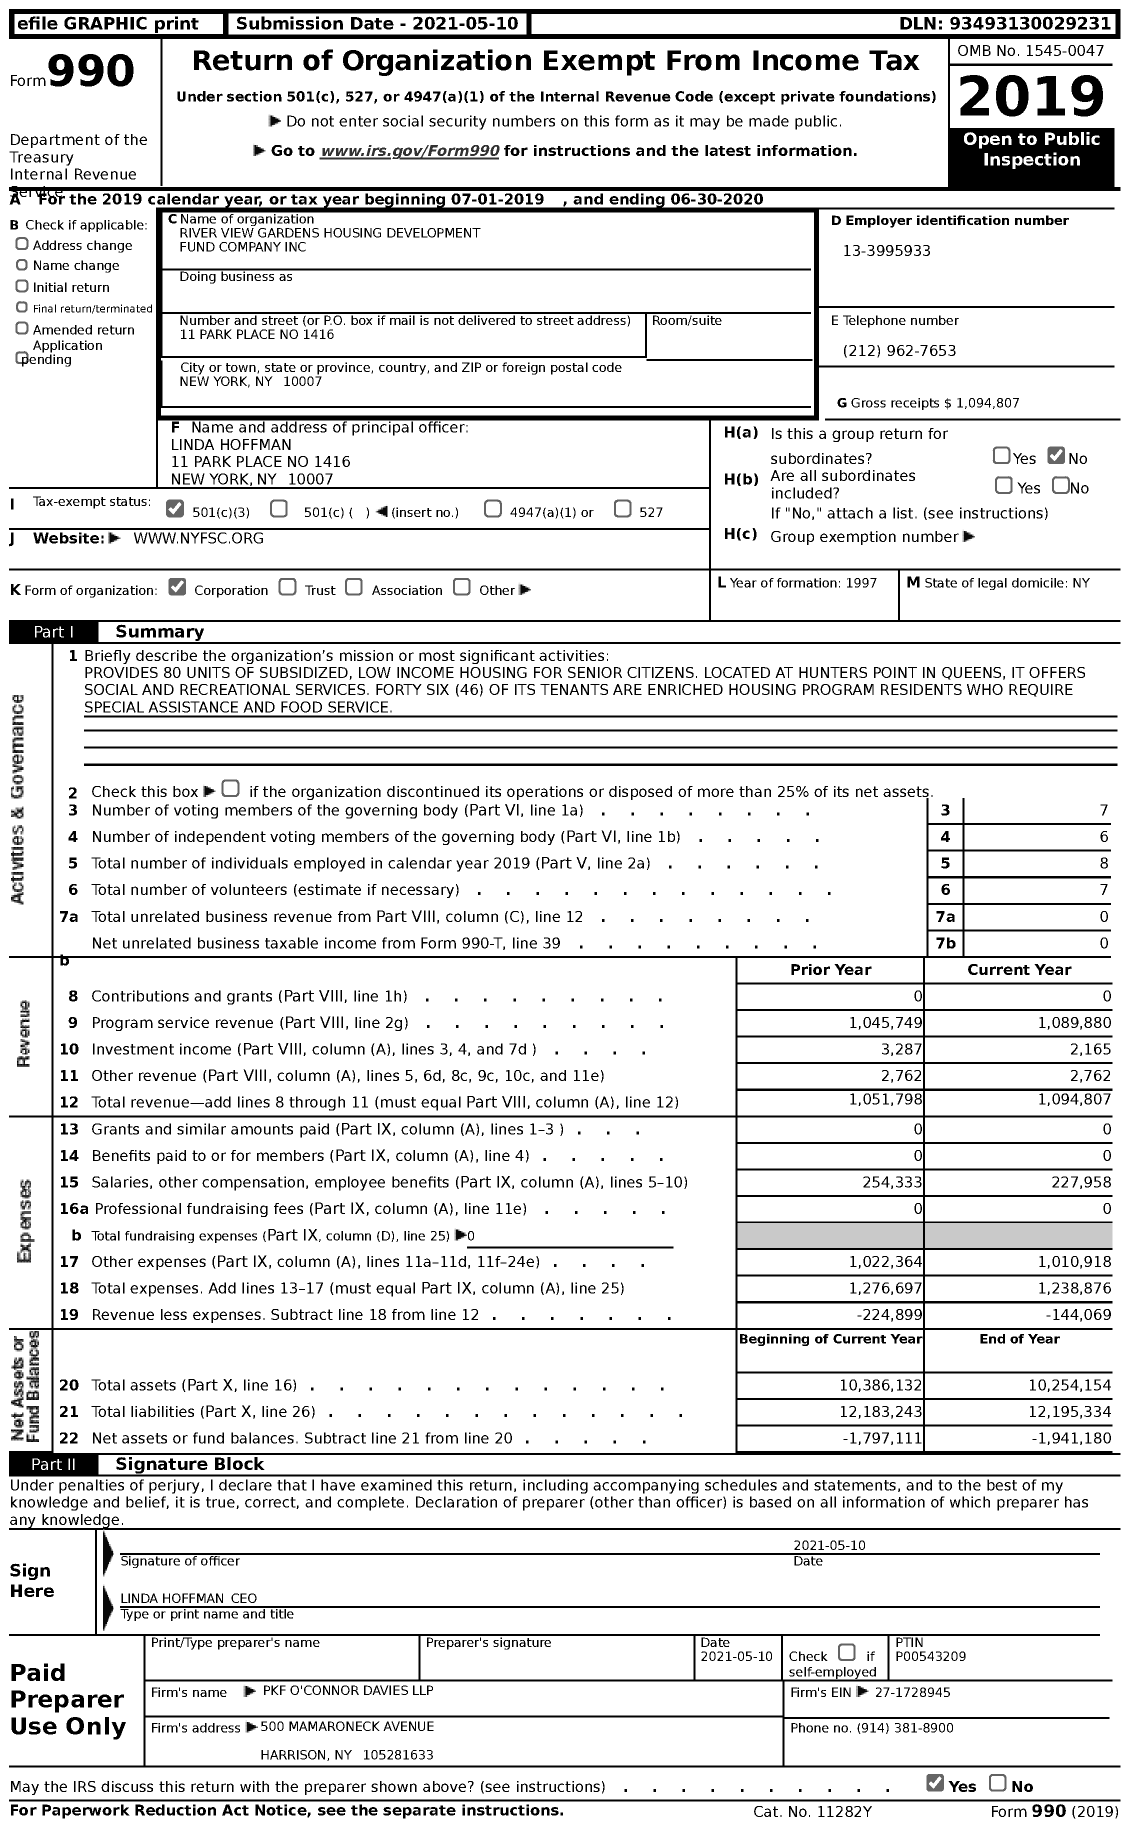 Image of first page of 2019 Form 990 for River View Gardens Housing Development Fund Company